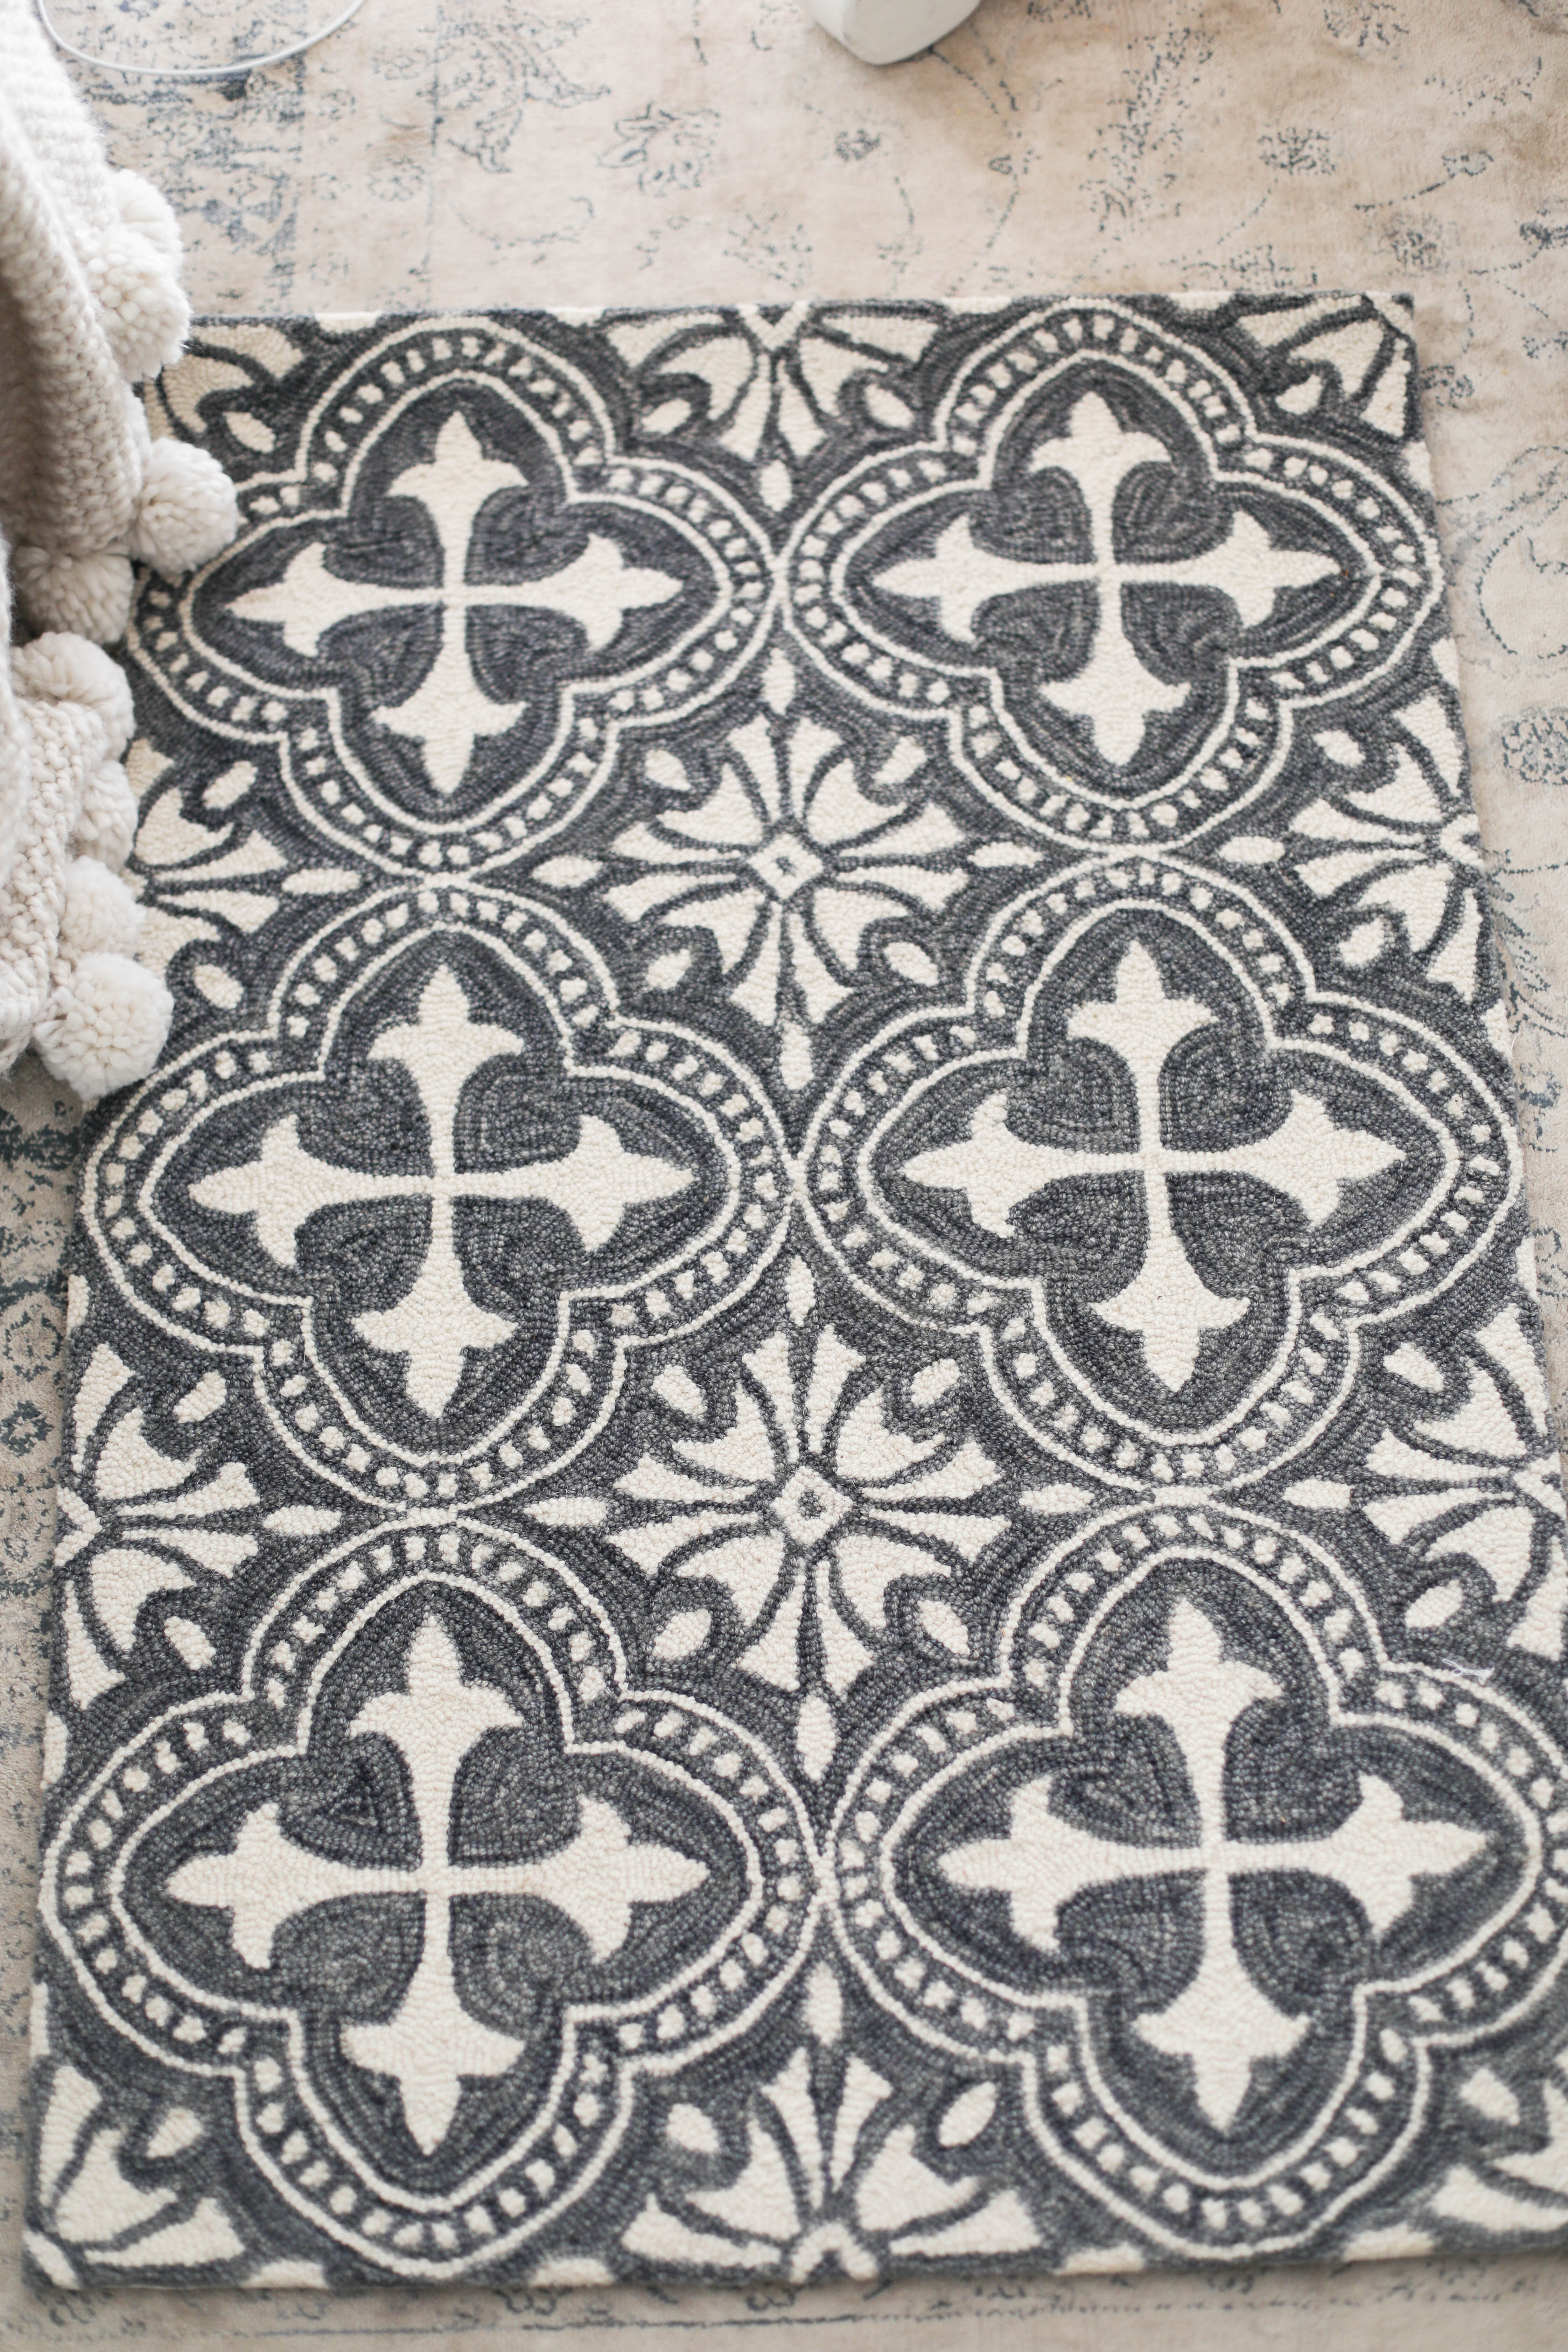 Life and style blogger Lauren McBride shares the latest updates on her designs in the Annie Selke Rug Design Challenge.